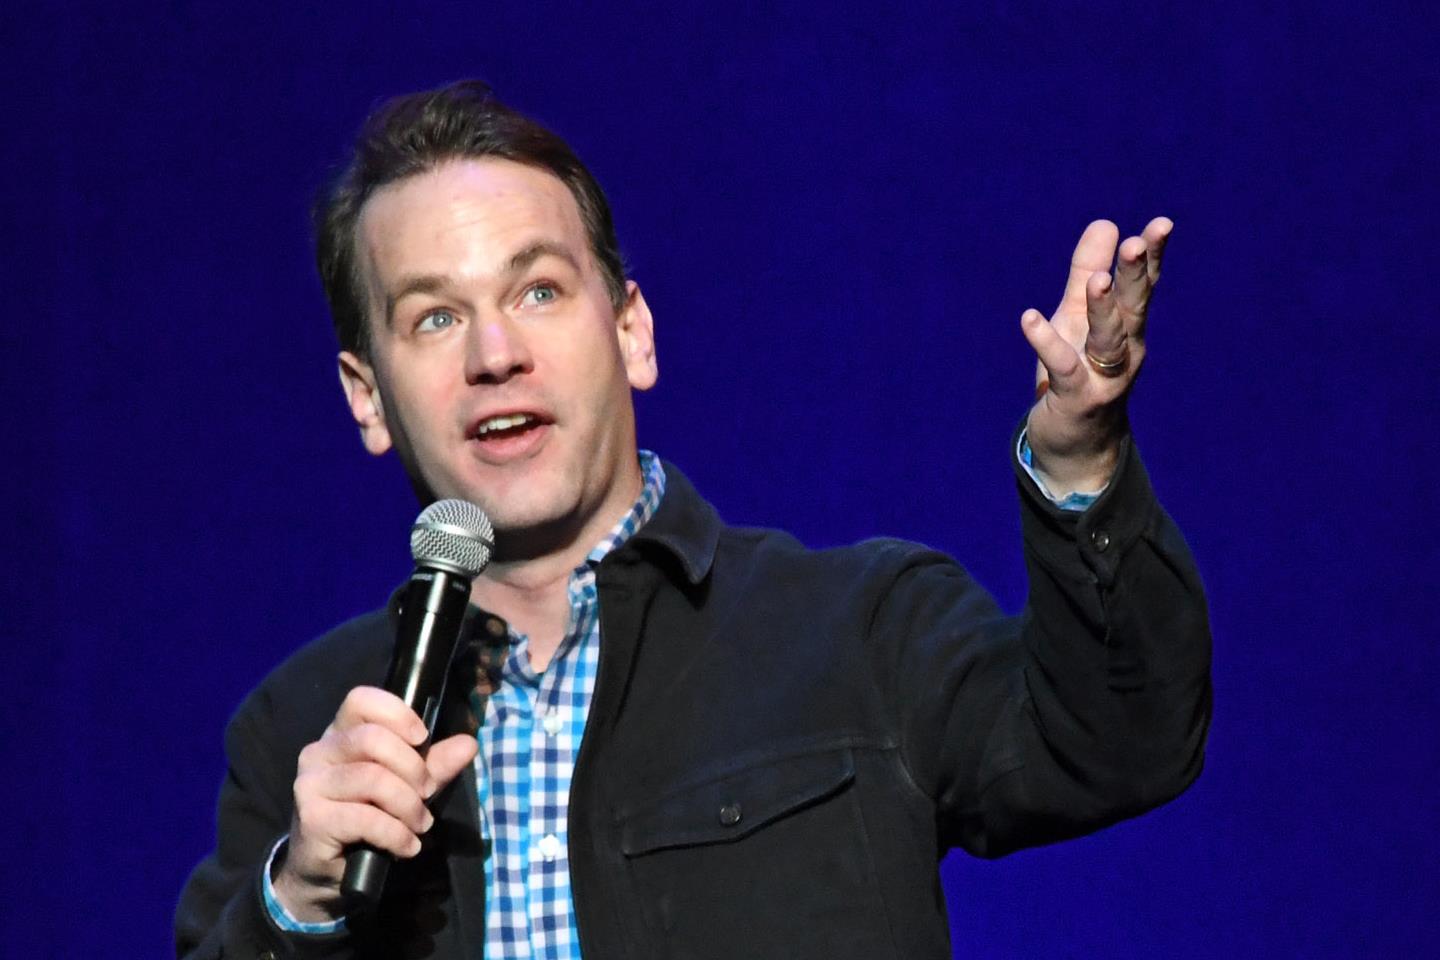 Mike Birbiglia Tickets Buy or Sell Tickets for Mike Birbiglia Tour